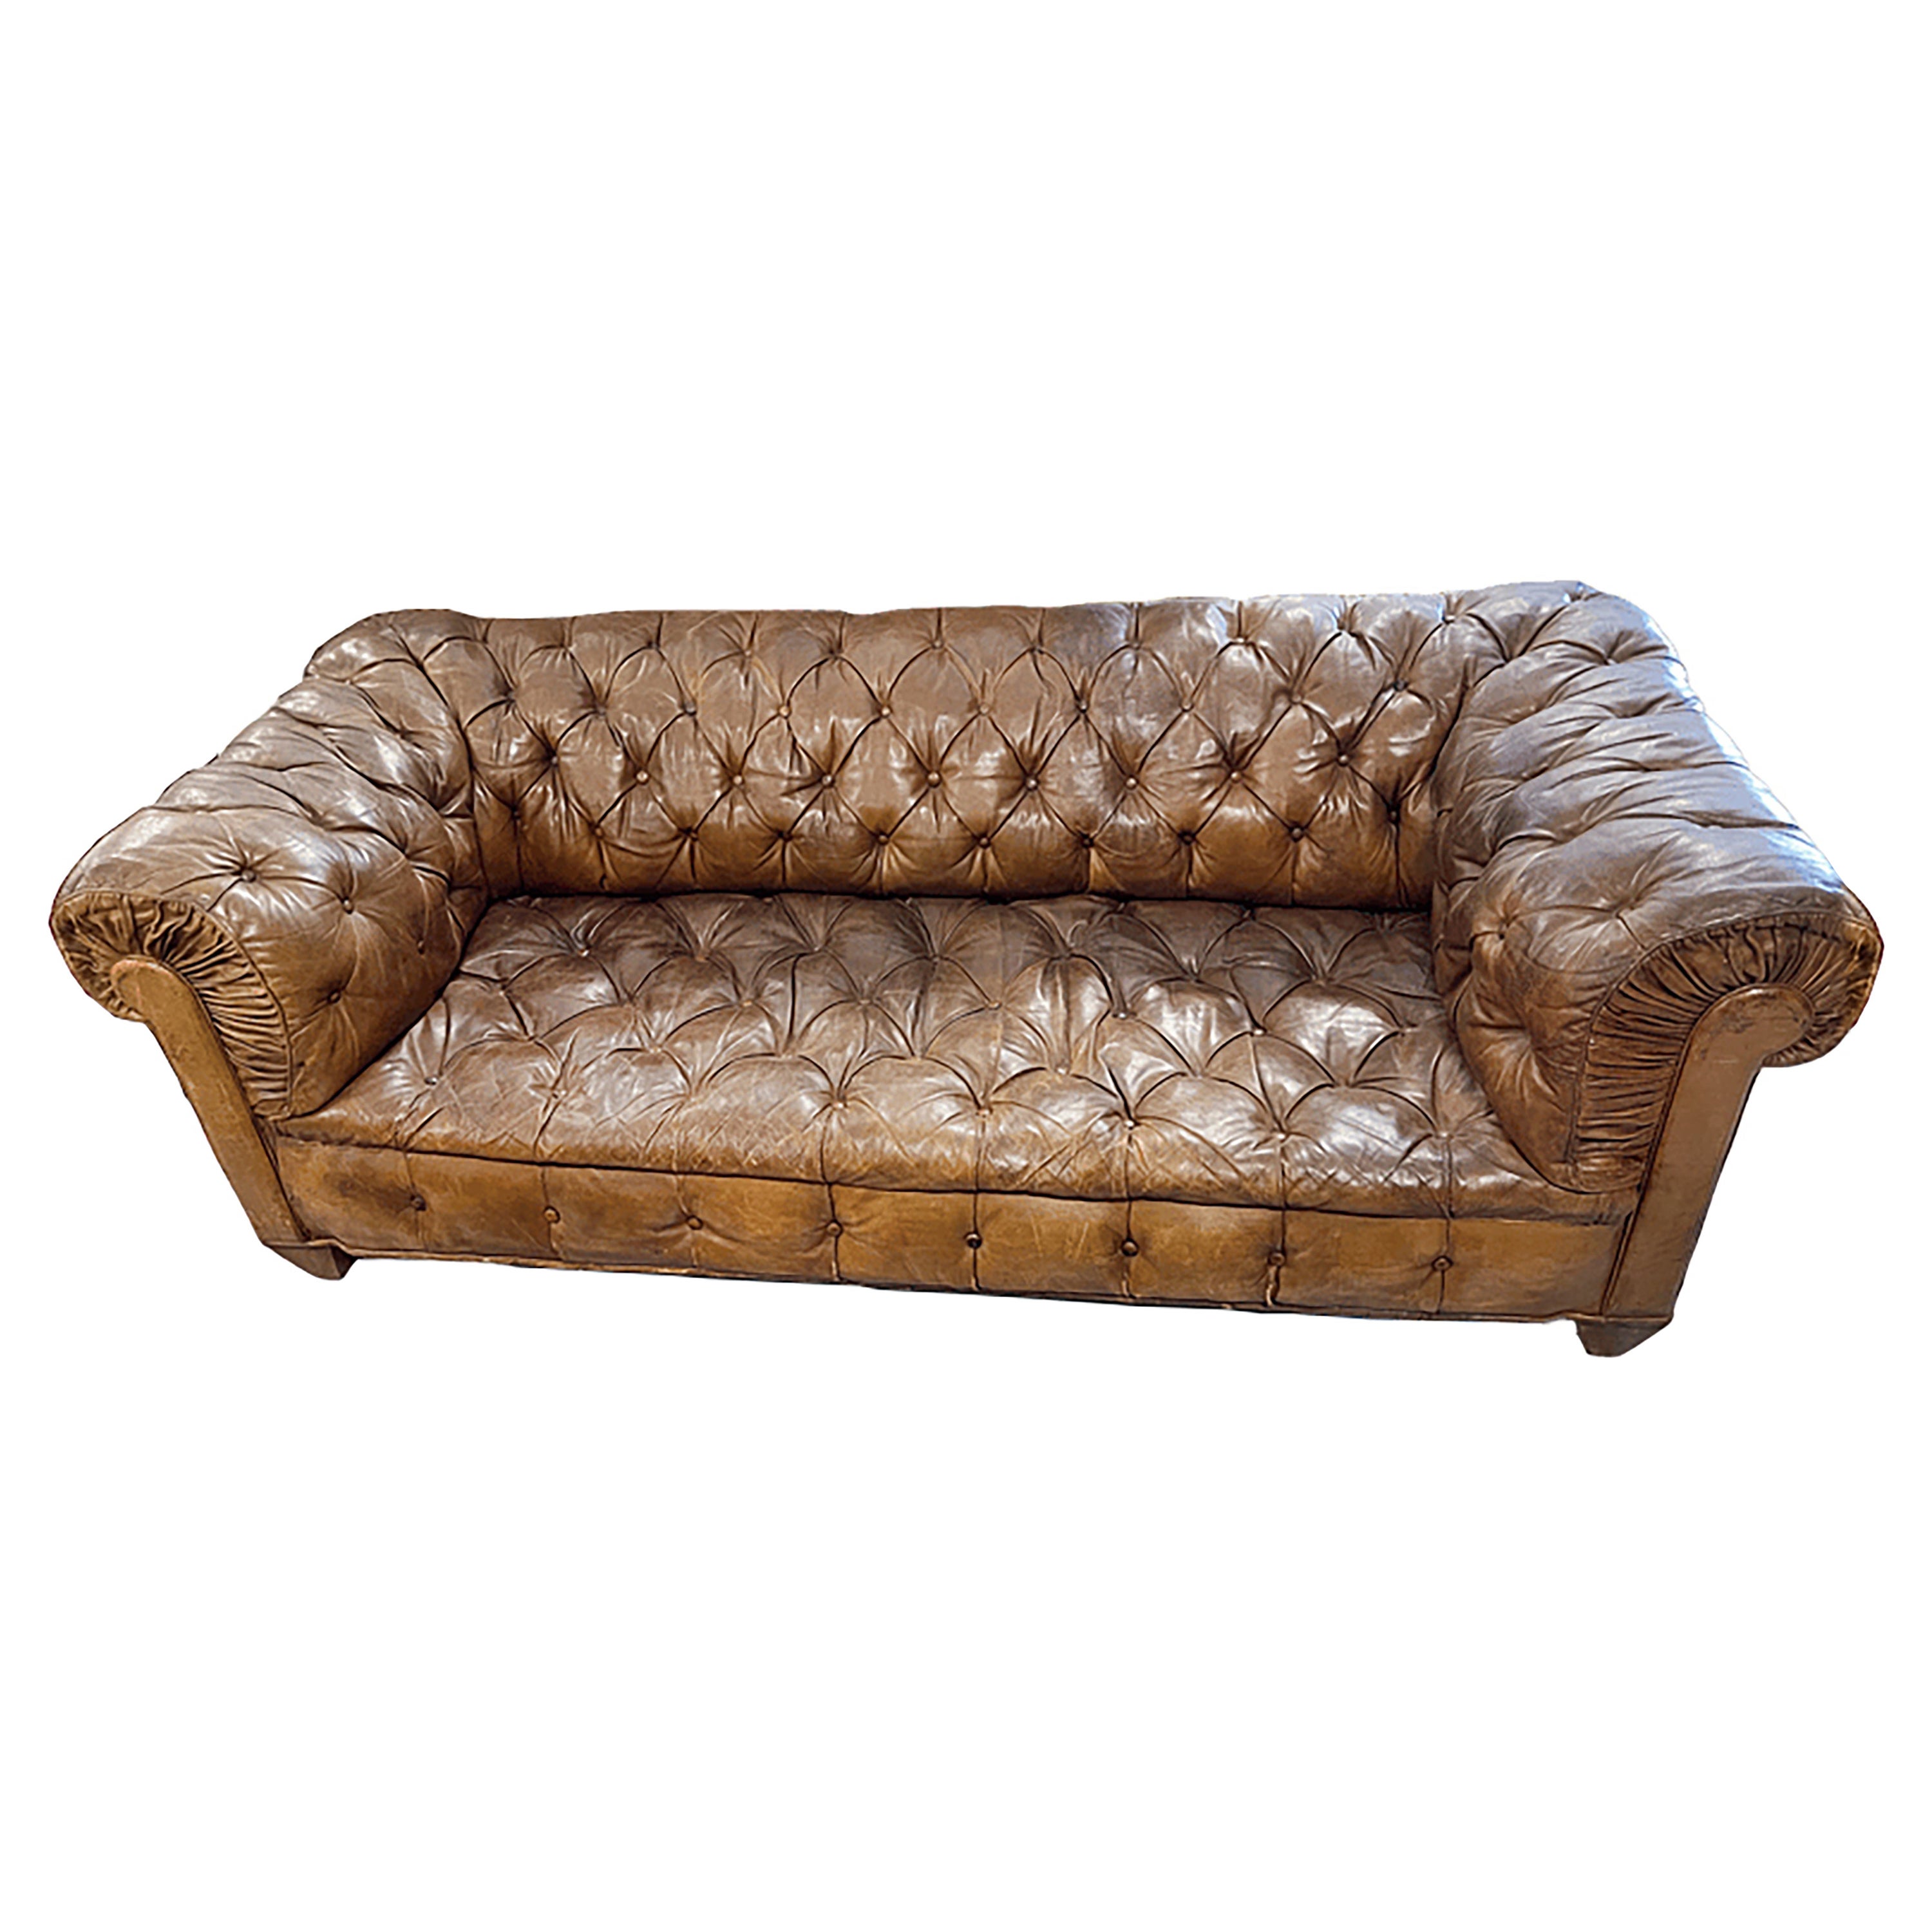 Can I recover a Chesterfield sofa?